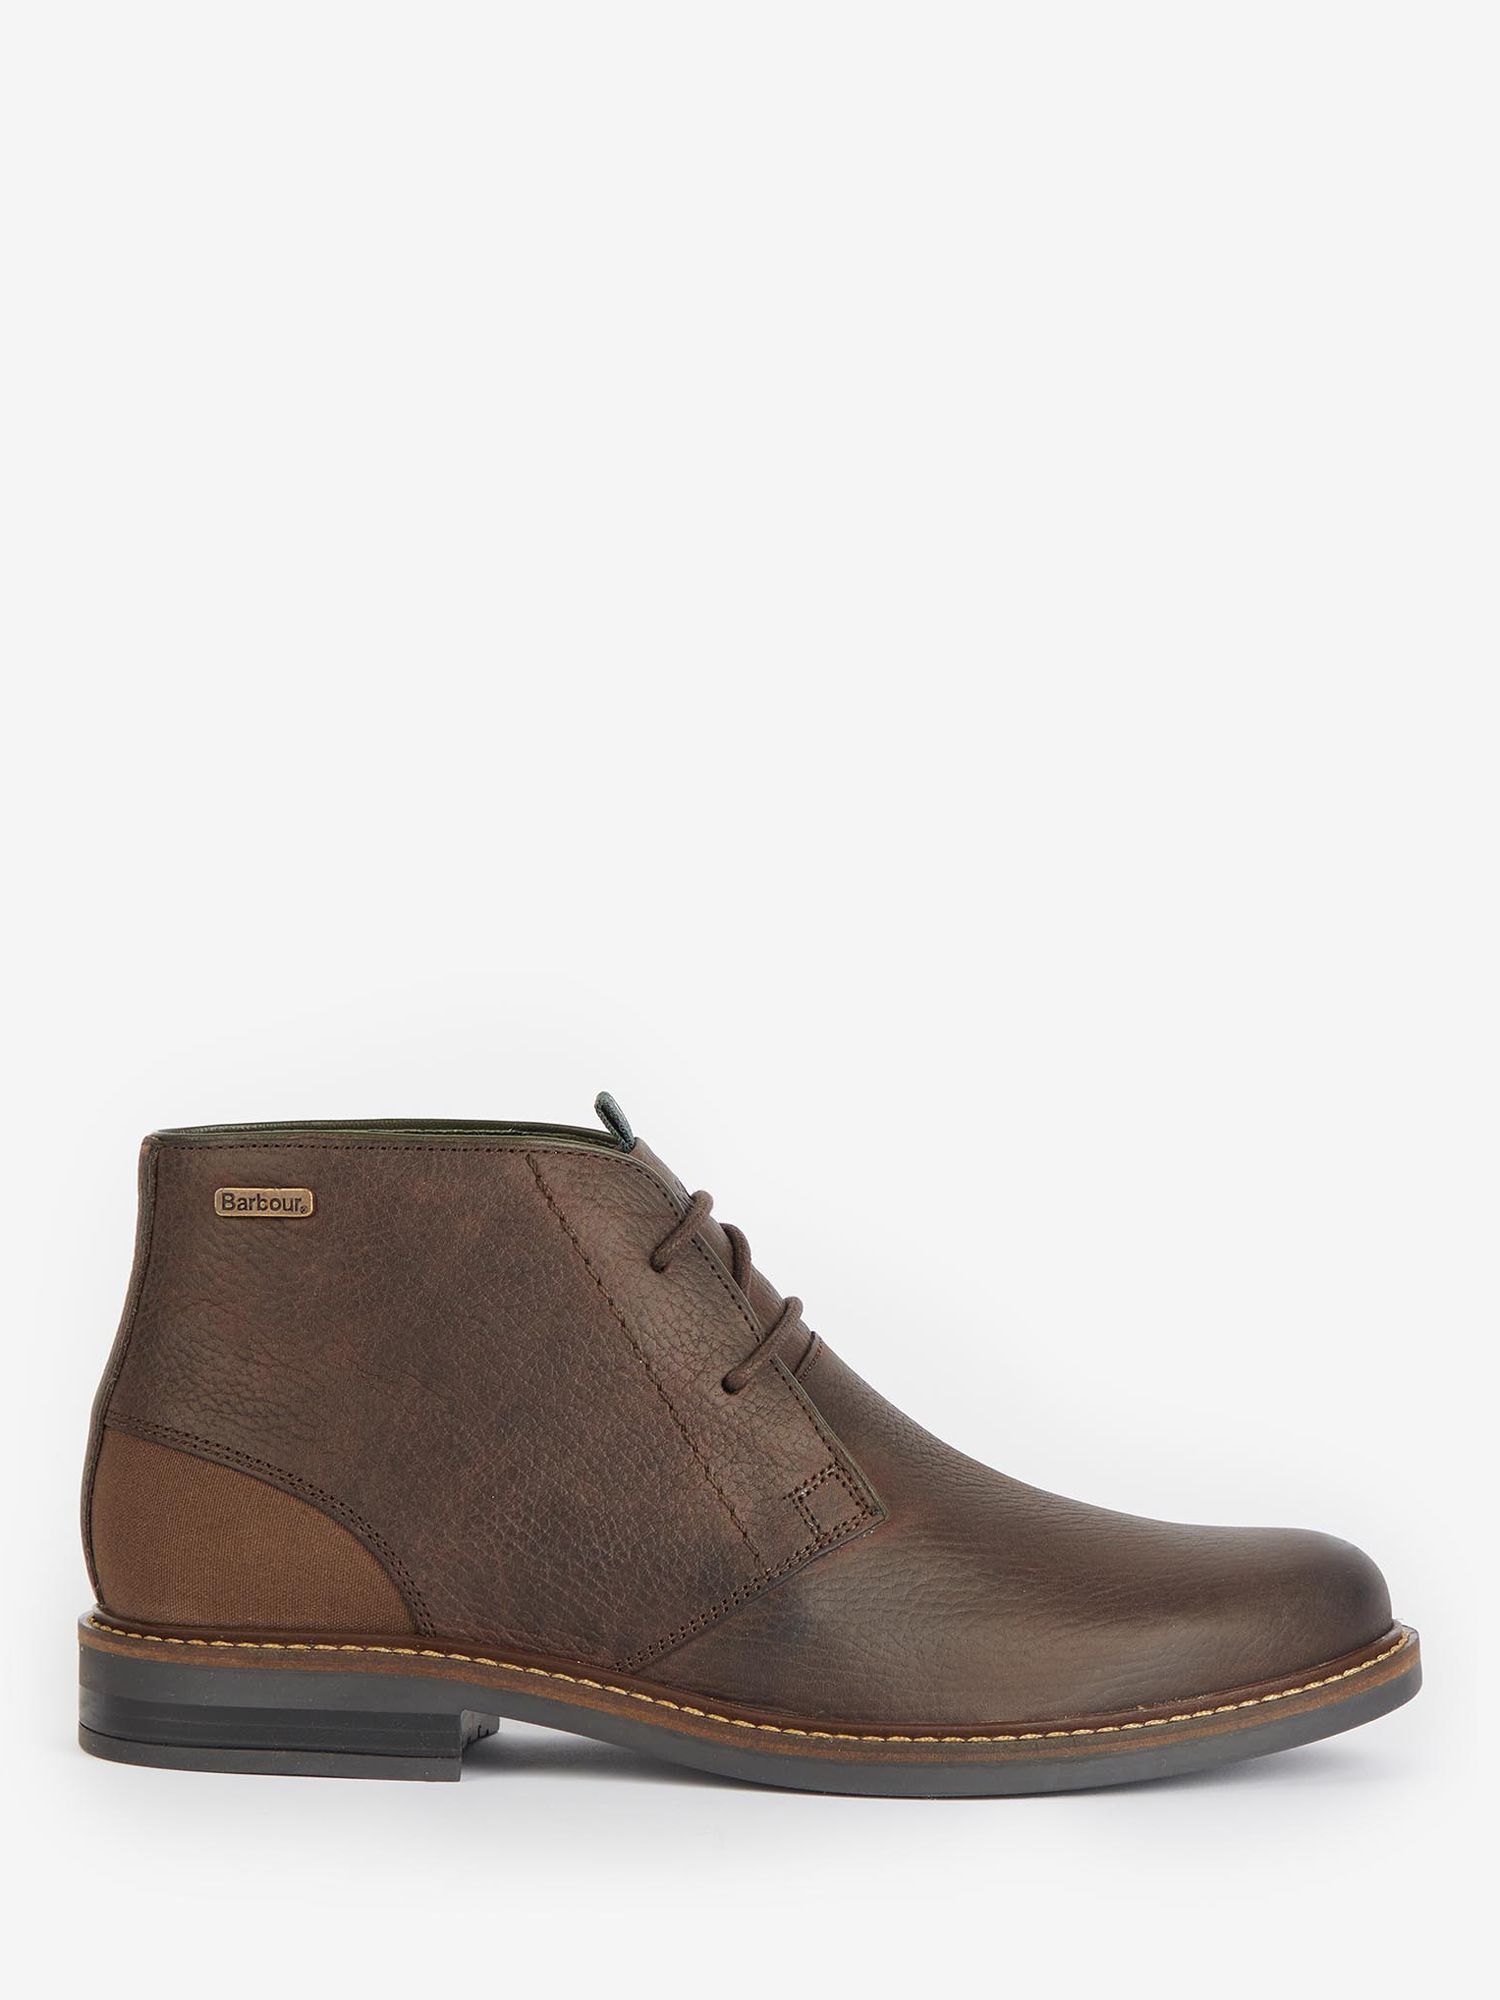 Barbour Redhead Leather Chukka Boots, Mocha at John Lewis & Partners